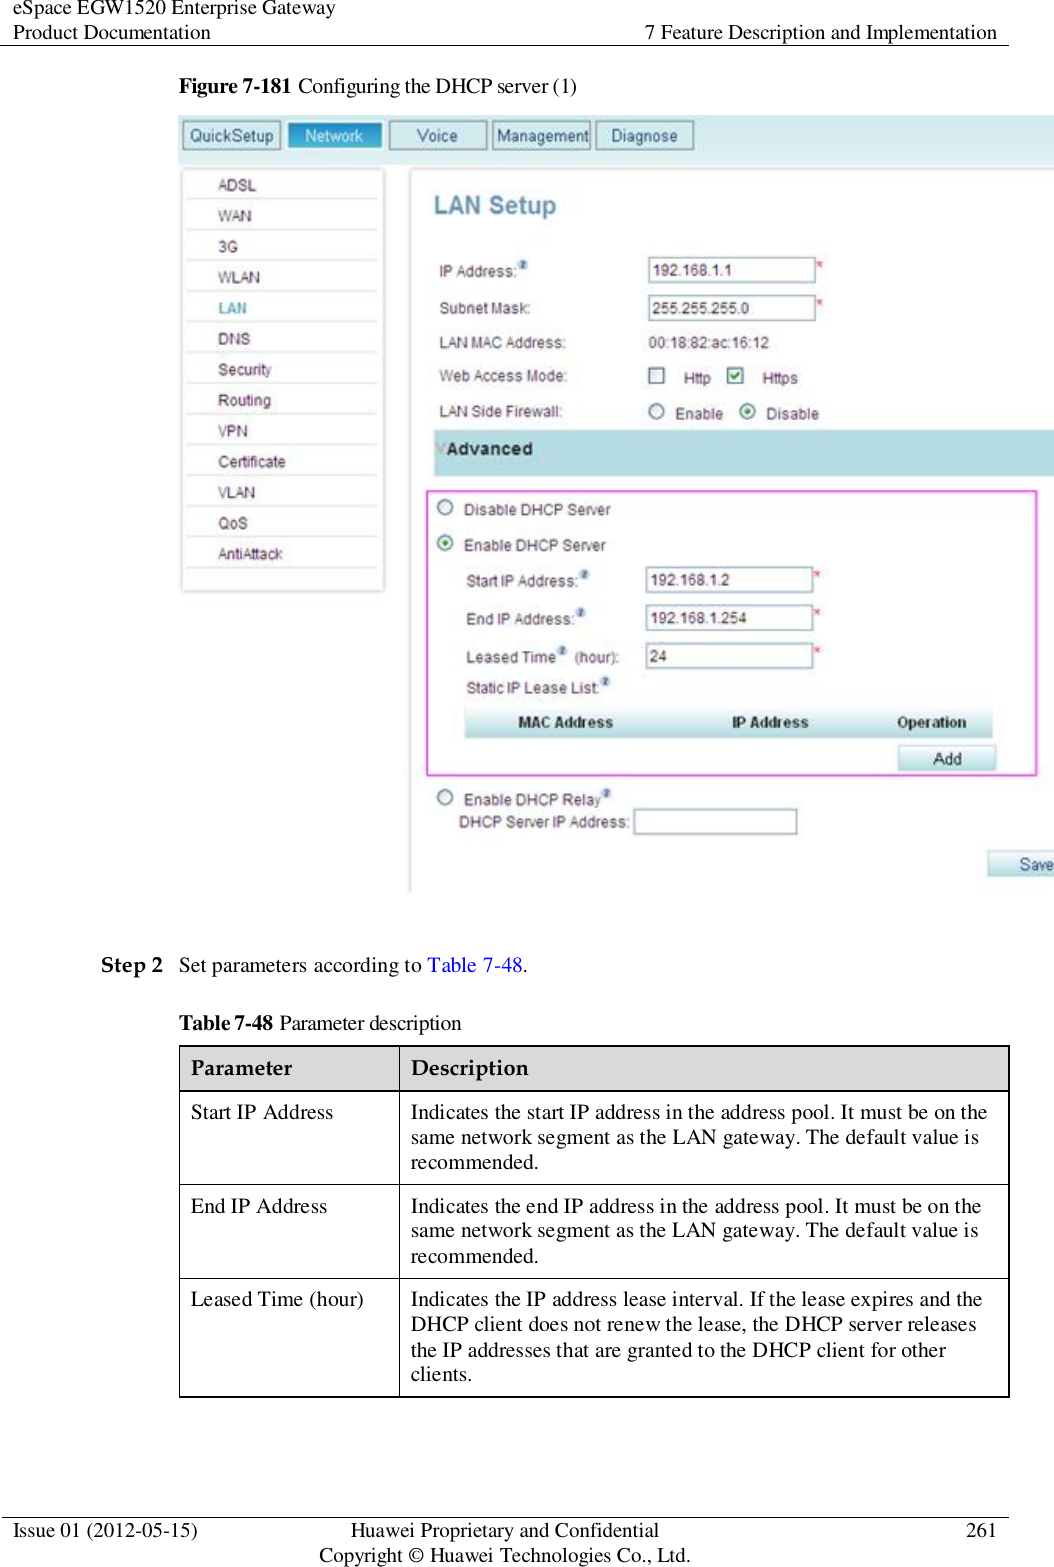 eSpace EGW1520 Enterprise Gateway Product Documentation 7 Feature Description and Implementation  Issue 01 (2012-05-15) Huawei Proprietary and Confidential                                     Copyright © Huawei Technologies Co., Ltd. 261  Figure 7-181 Configuring the DHCP server (1)   Step 2 Set parameters according to Table 7-48. Table 7-48 Parameter description Parameter Description Start IP Address Indicates the start IP address in the address pool. It must be on the same network segment as the LAN gateway. The default value is recommended. End IP Address Indicates the end IP address in the address pool. It must be on the same network segment as the LAN gateway. The default value is recommended. Leased Time (hour) Indicates the IP address lease interval. If the lease expires and the DHCP client does not renew the lease, the DHCP server releases the IP addresses that are granted to the DHCP client for other clients.  